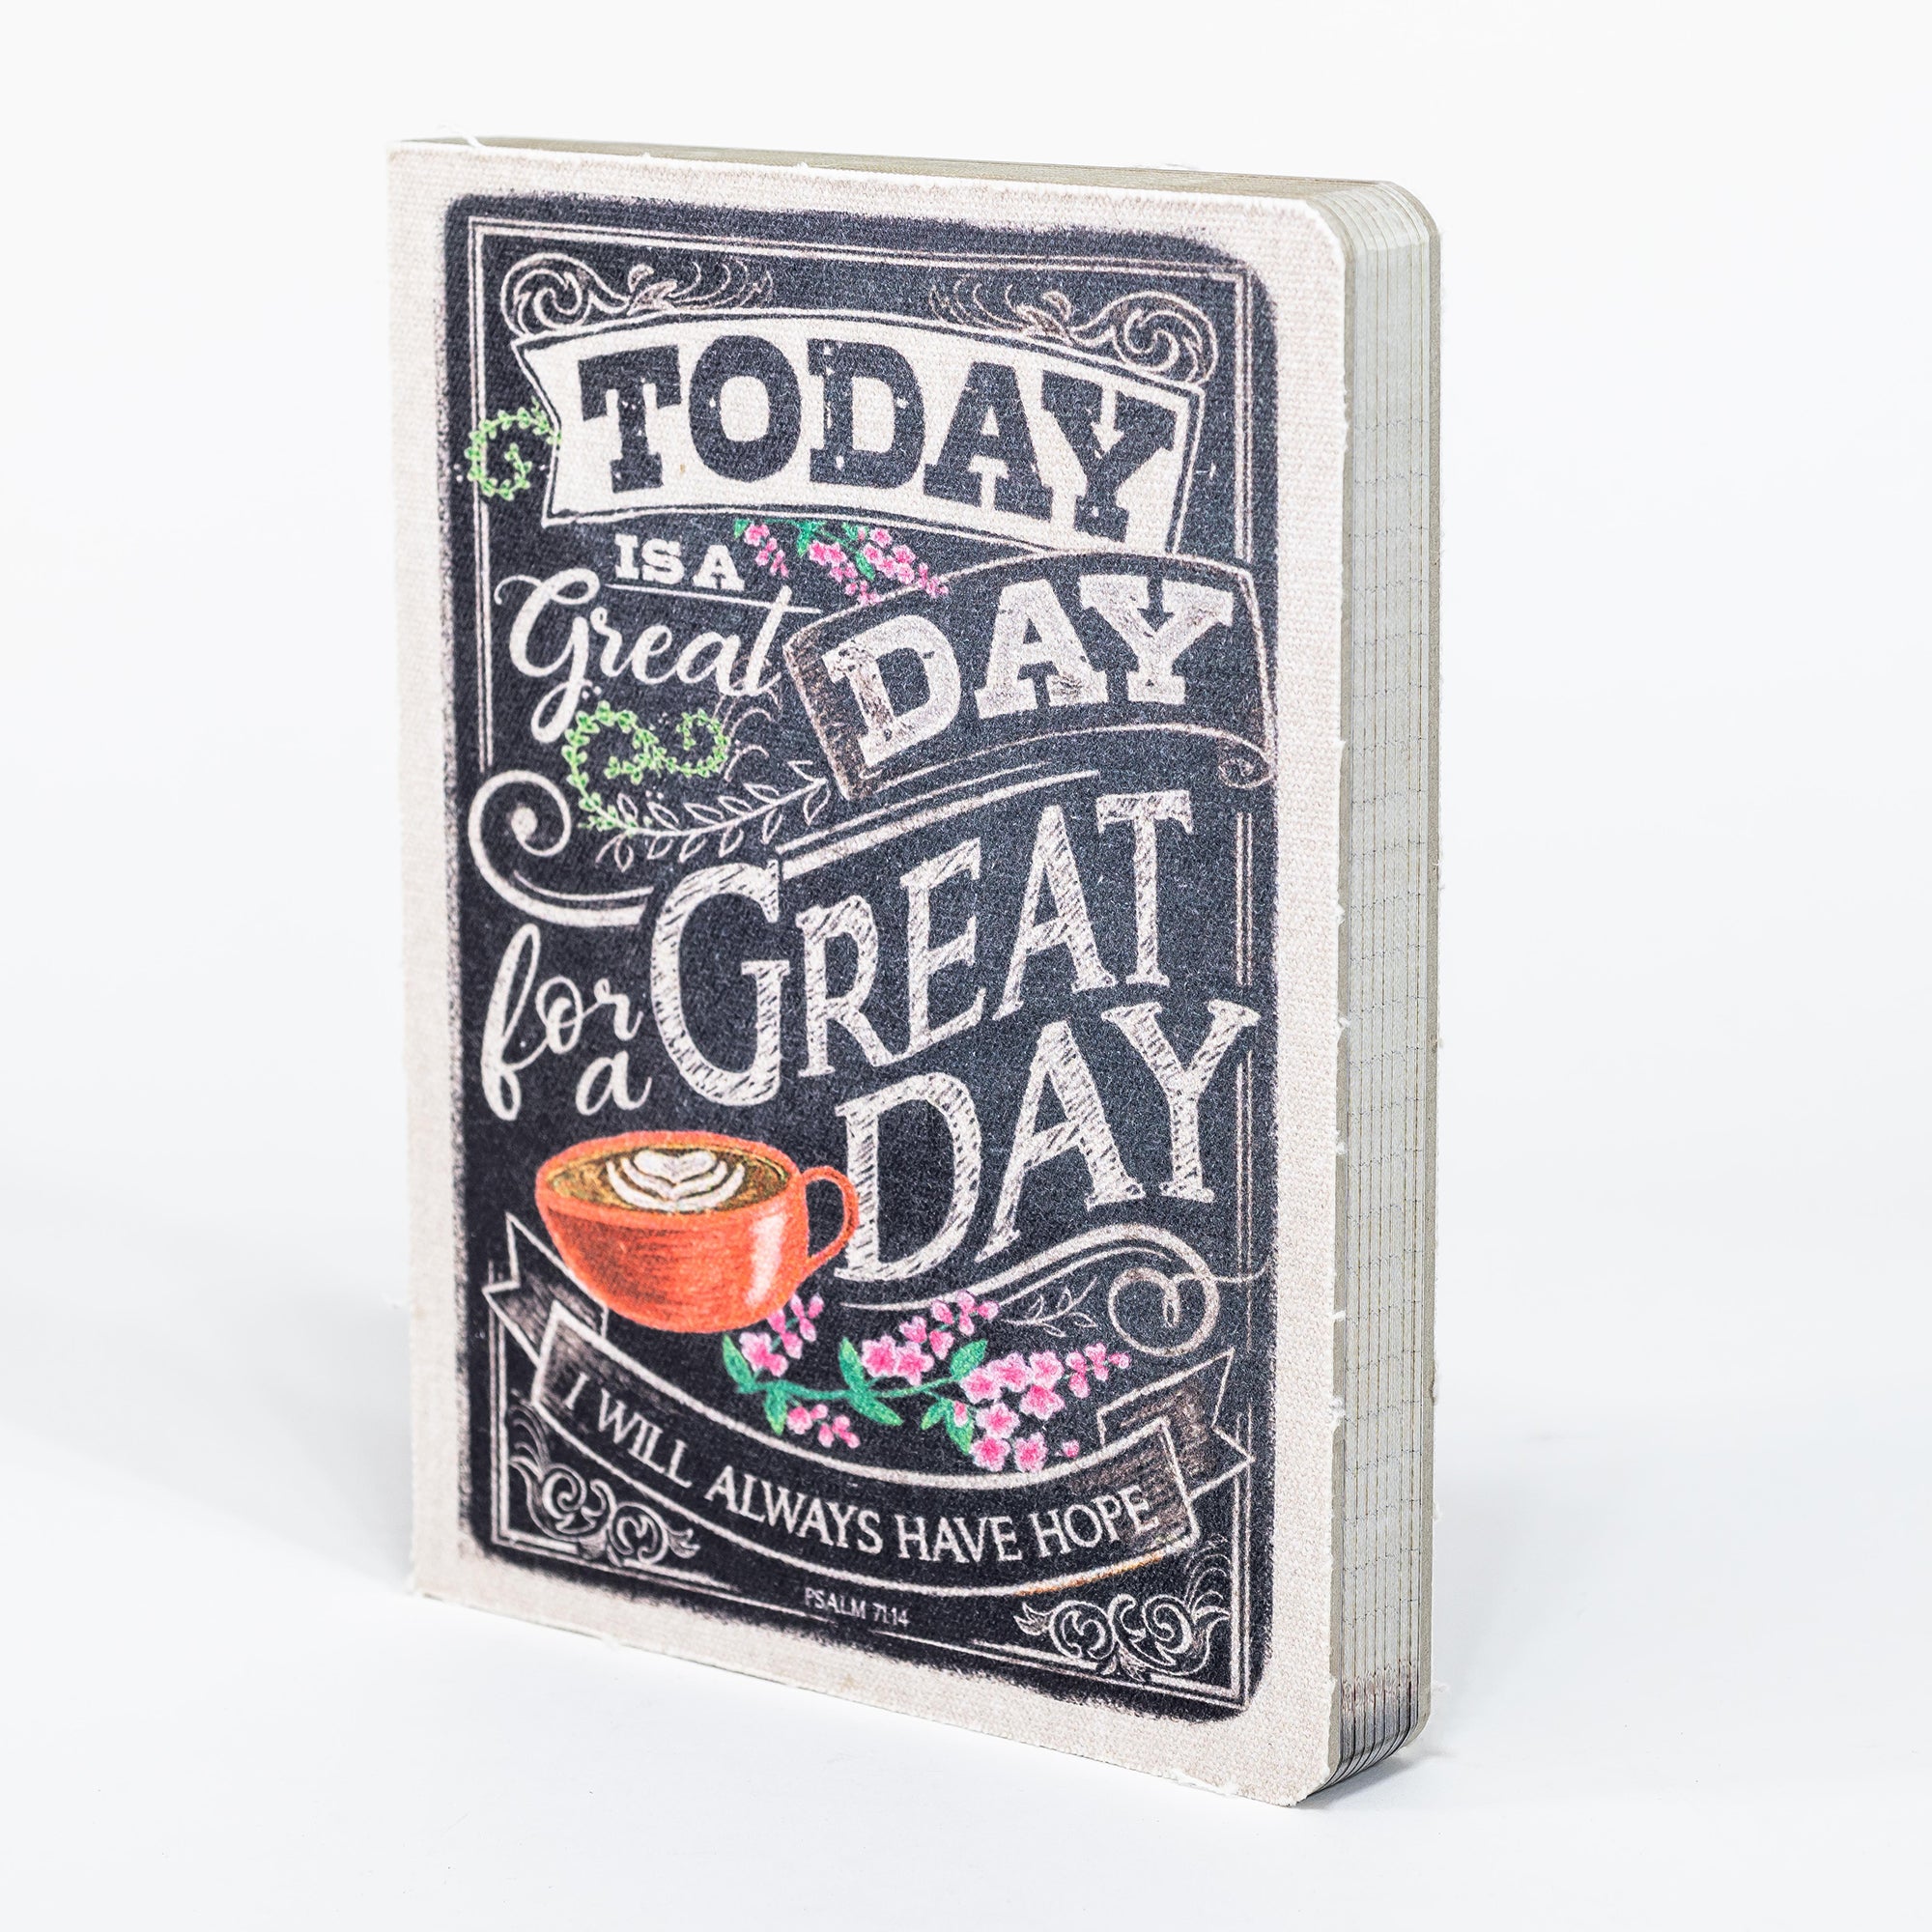 Deconstructed Journal : Today is a Great Day for a GREAT DAY!